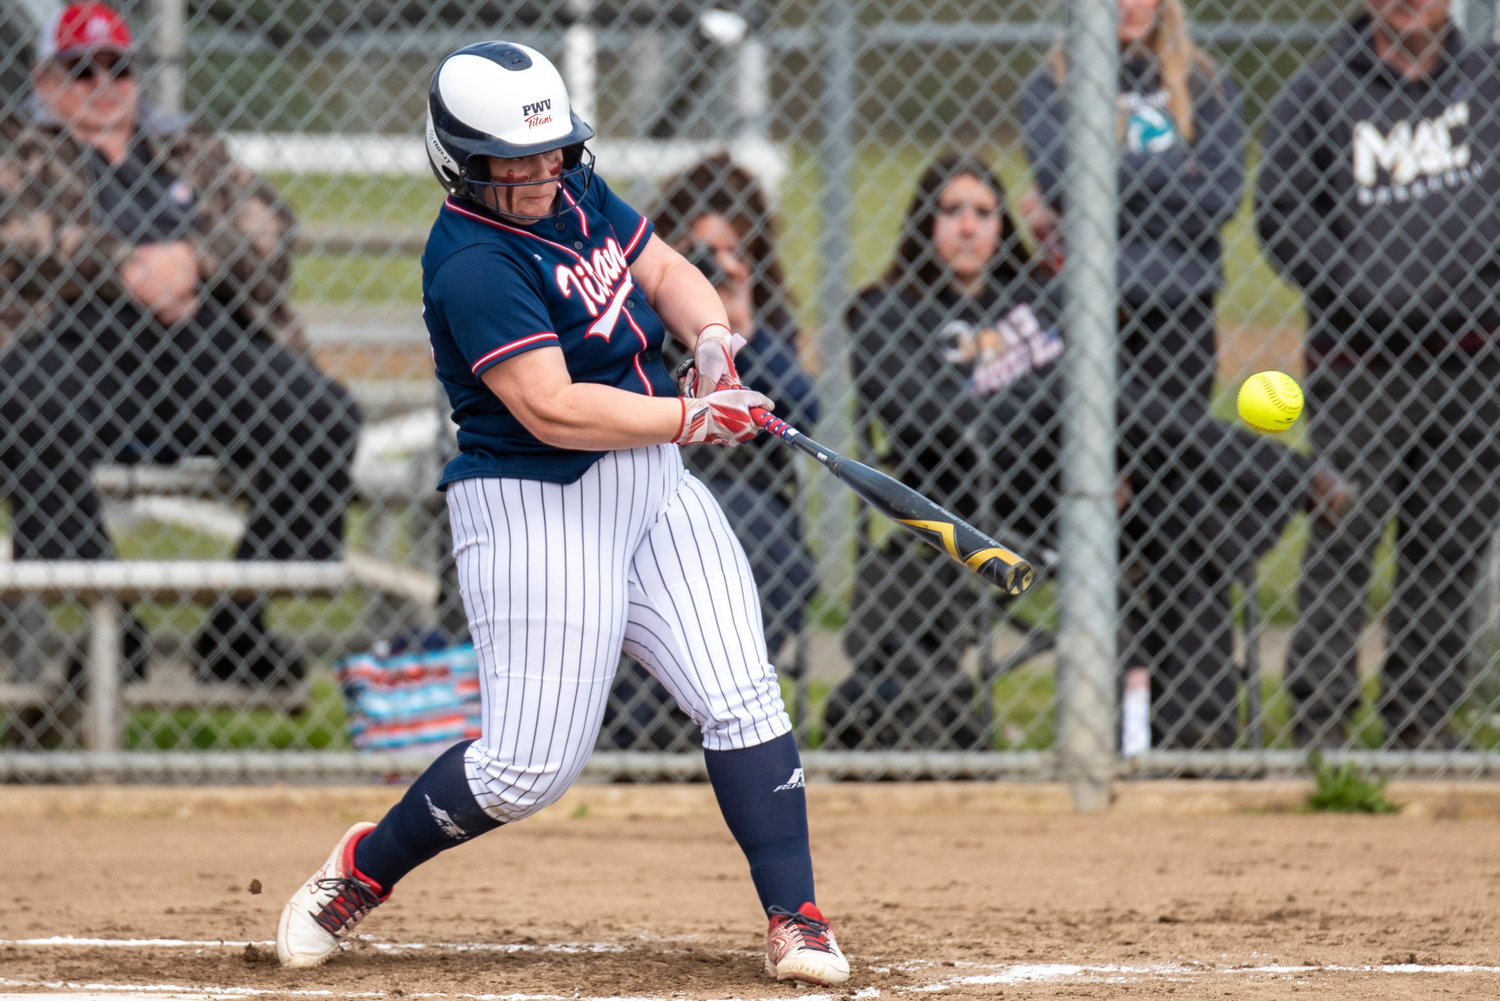 PWV's Ava Bush connects on a Forks pitch during a home game on April 1.